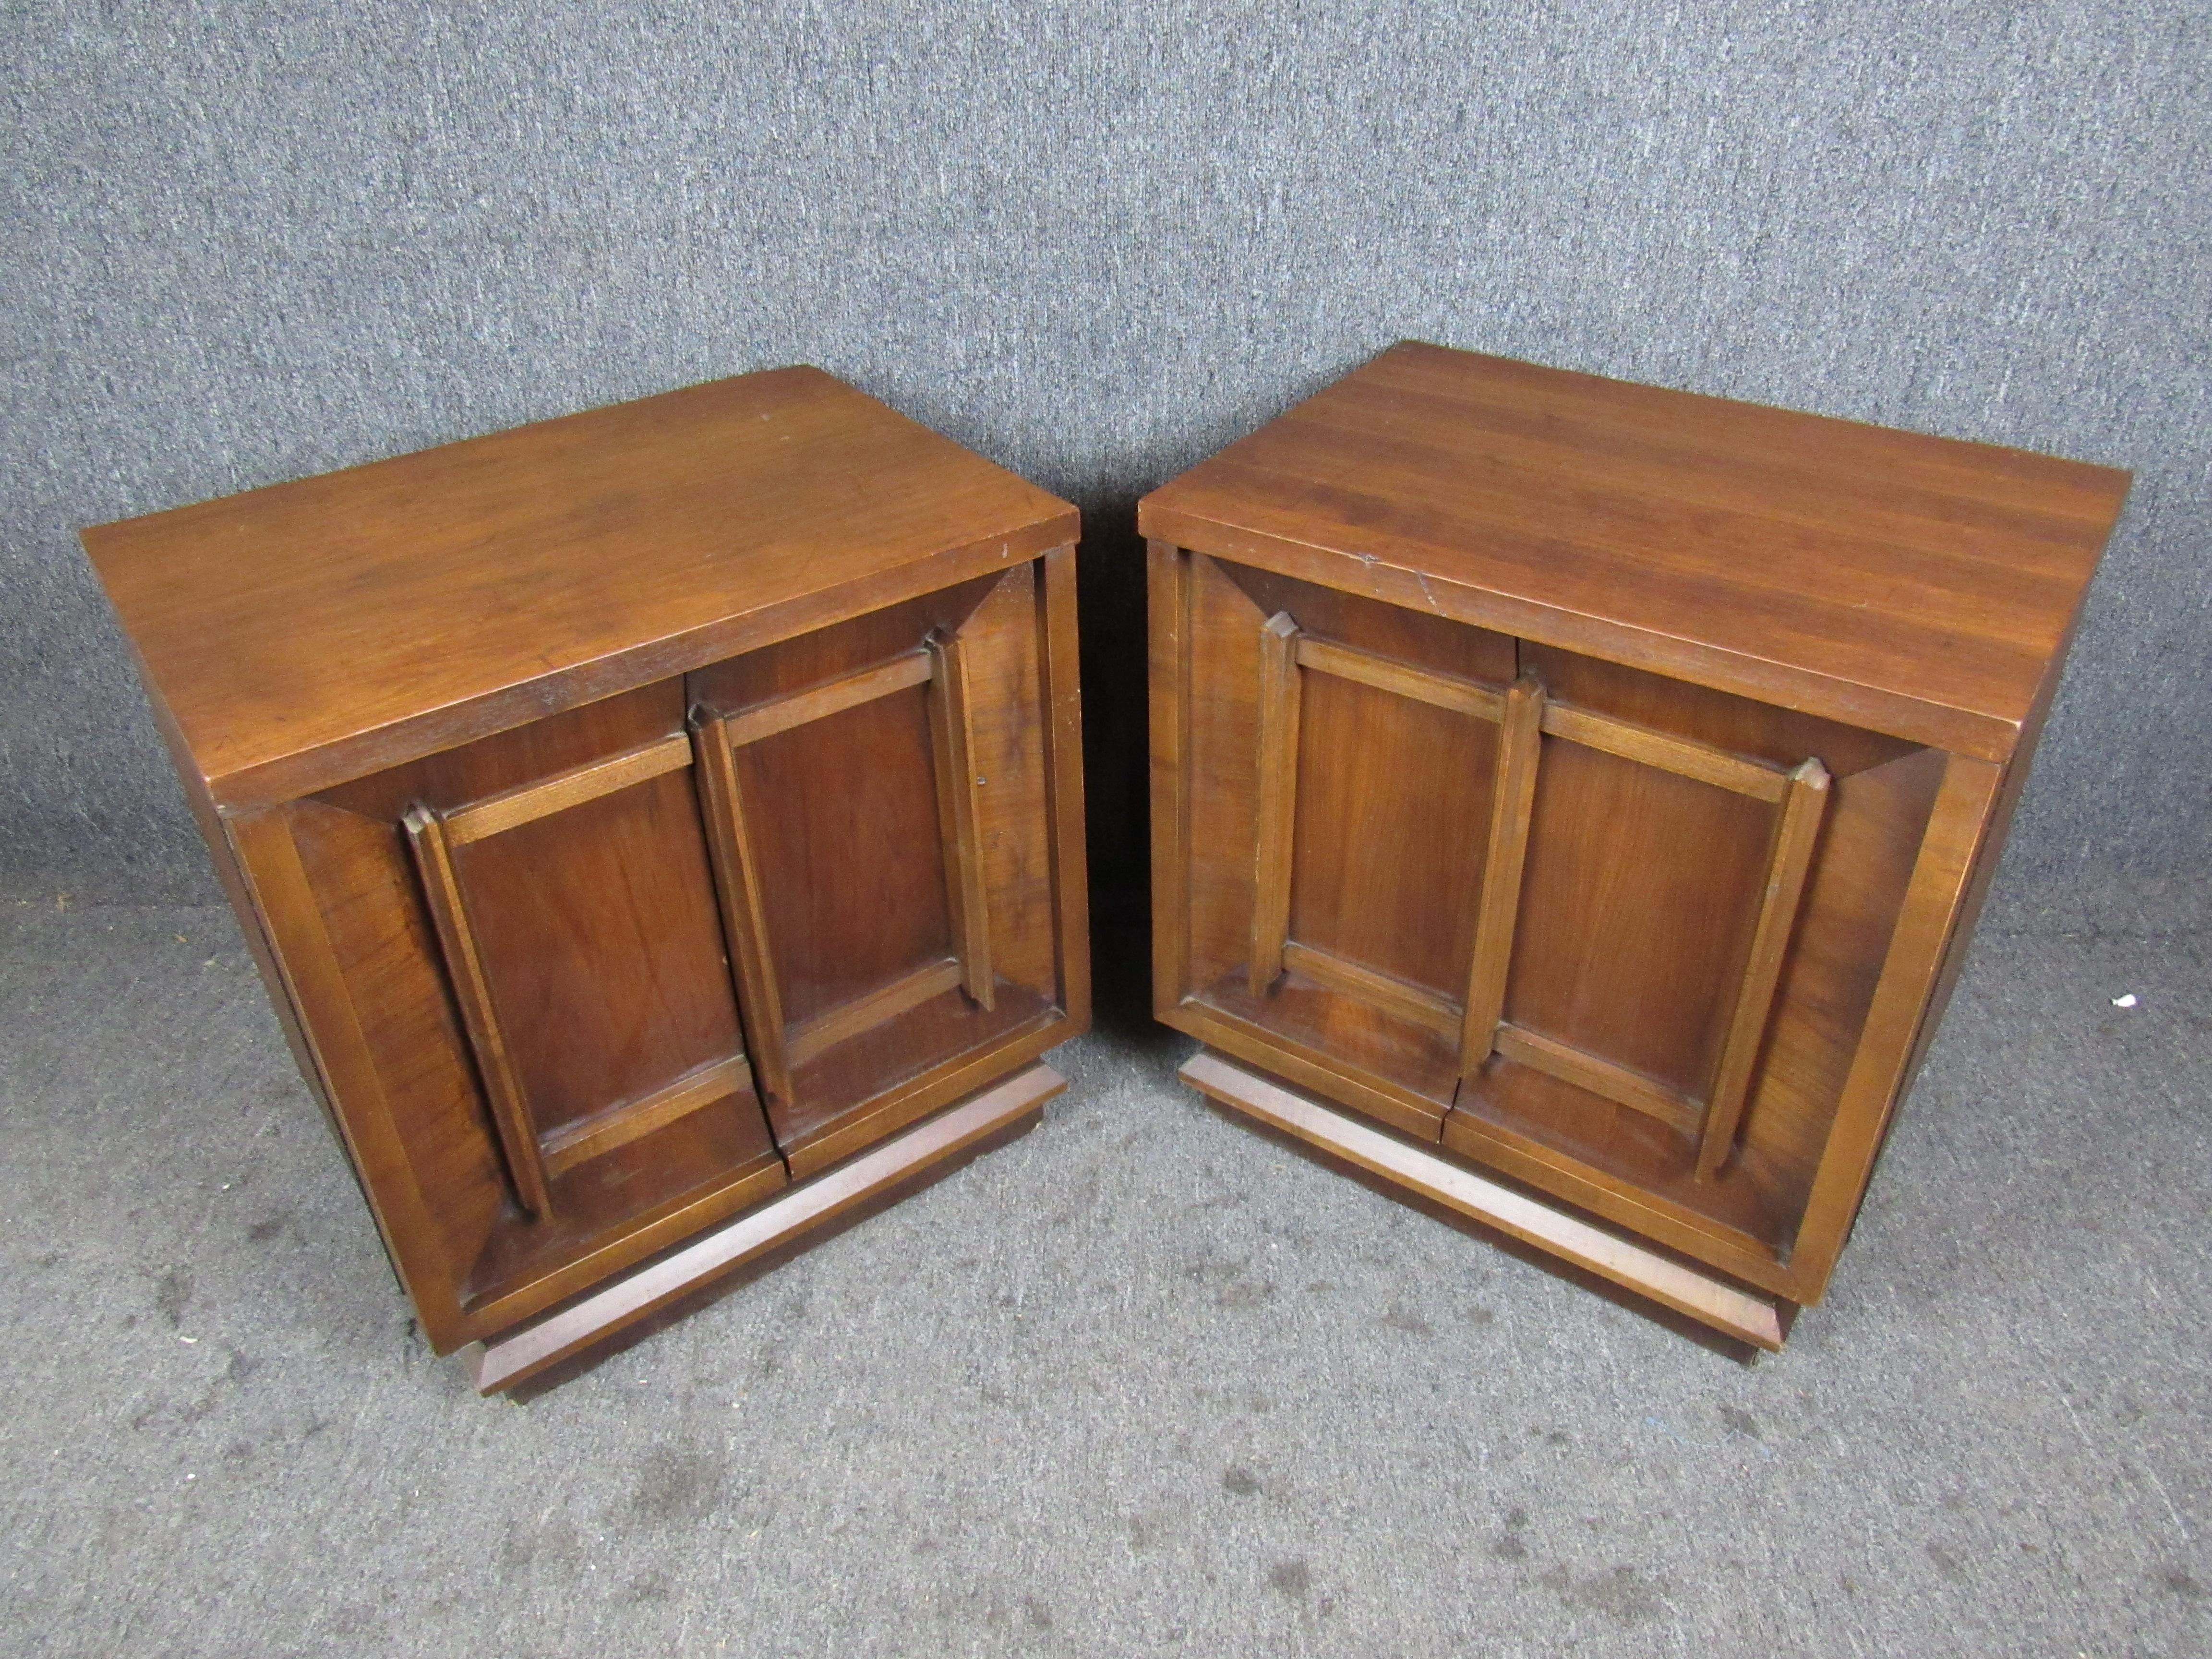 Fantastic pair of substantial vintage walnut nightstands with elegant sculpted doors. Blending brutalist and Asian design influences, this simple yet timeless design is sure to fit in seamlessly with a wide variety of decors- whether in the home or